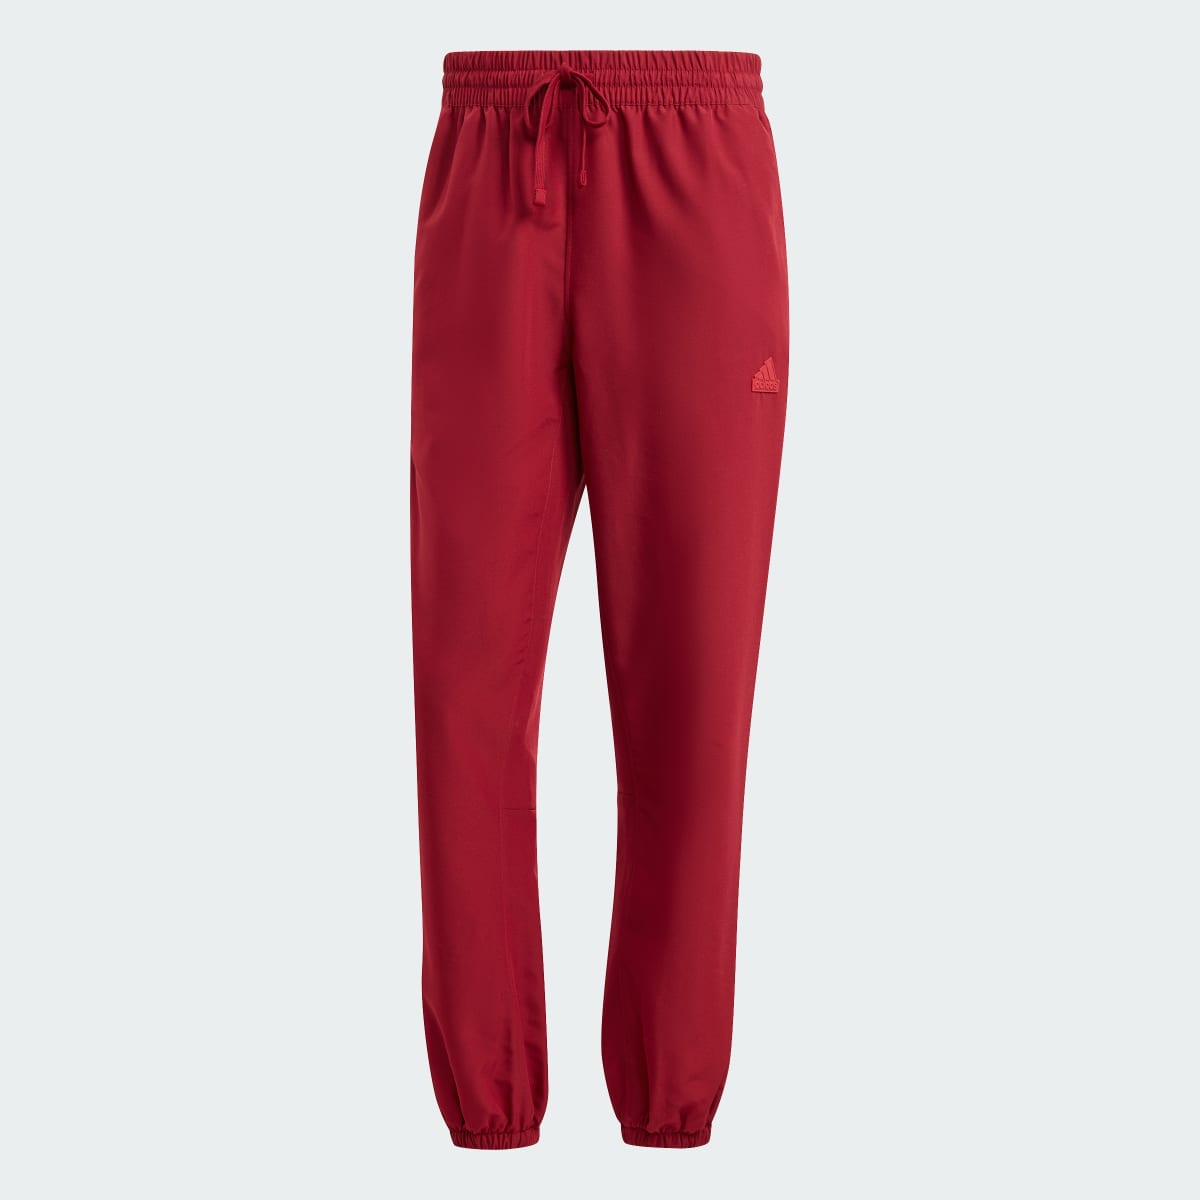 Adidas Manchester United Lifestyler Woven Pants. 5